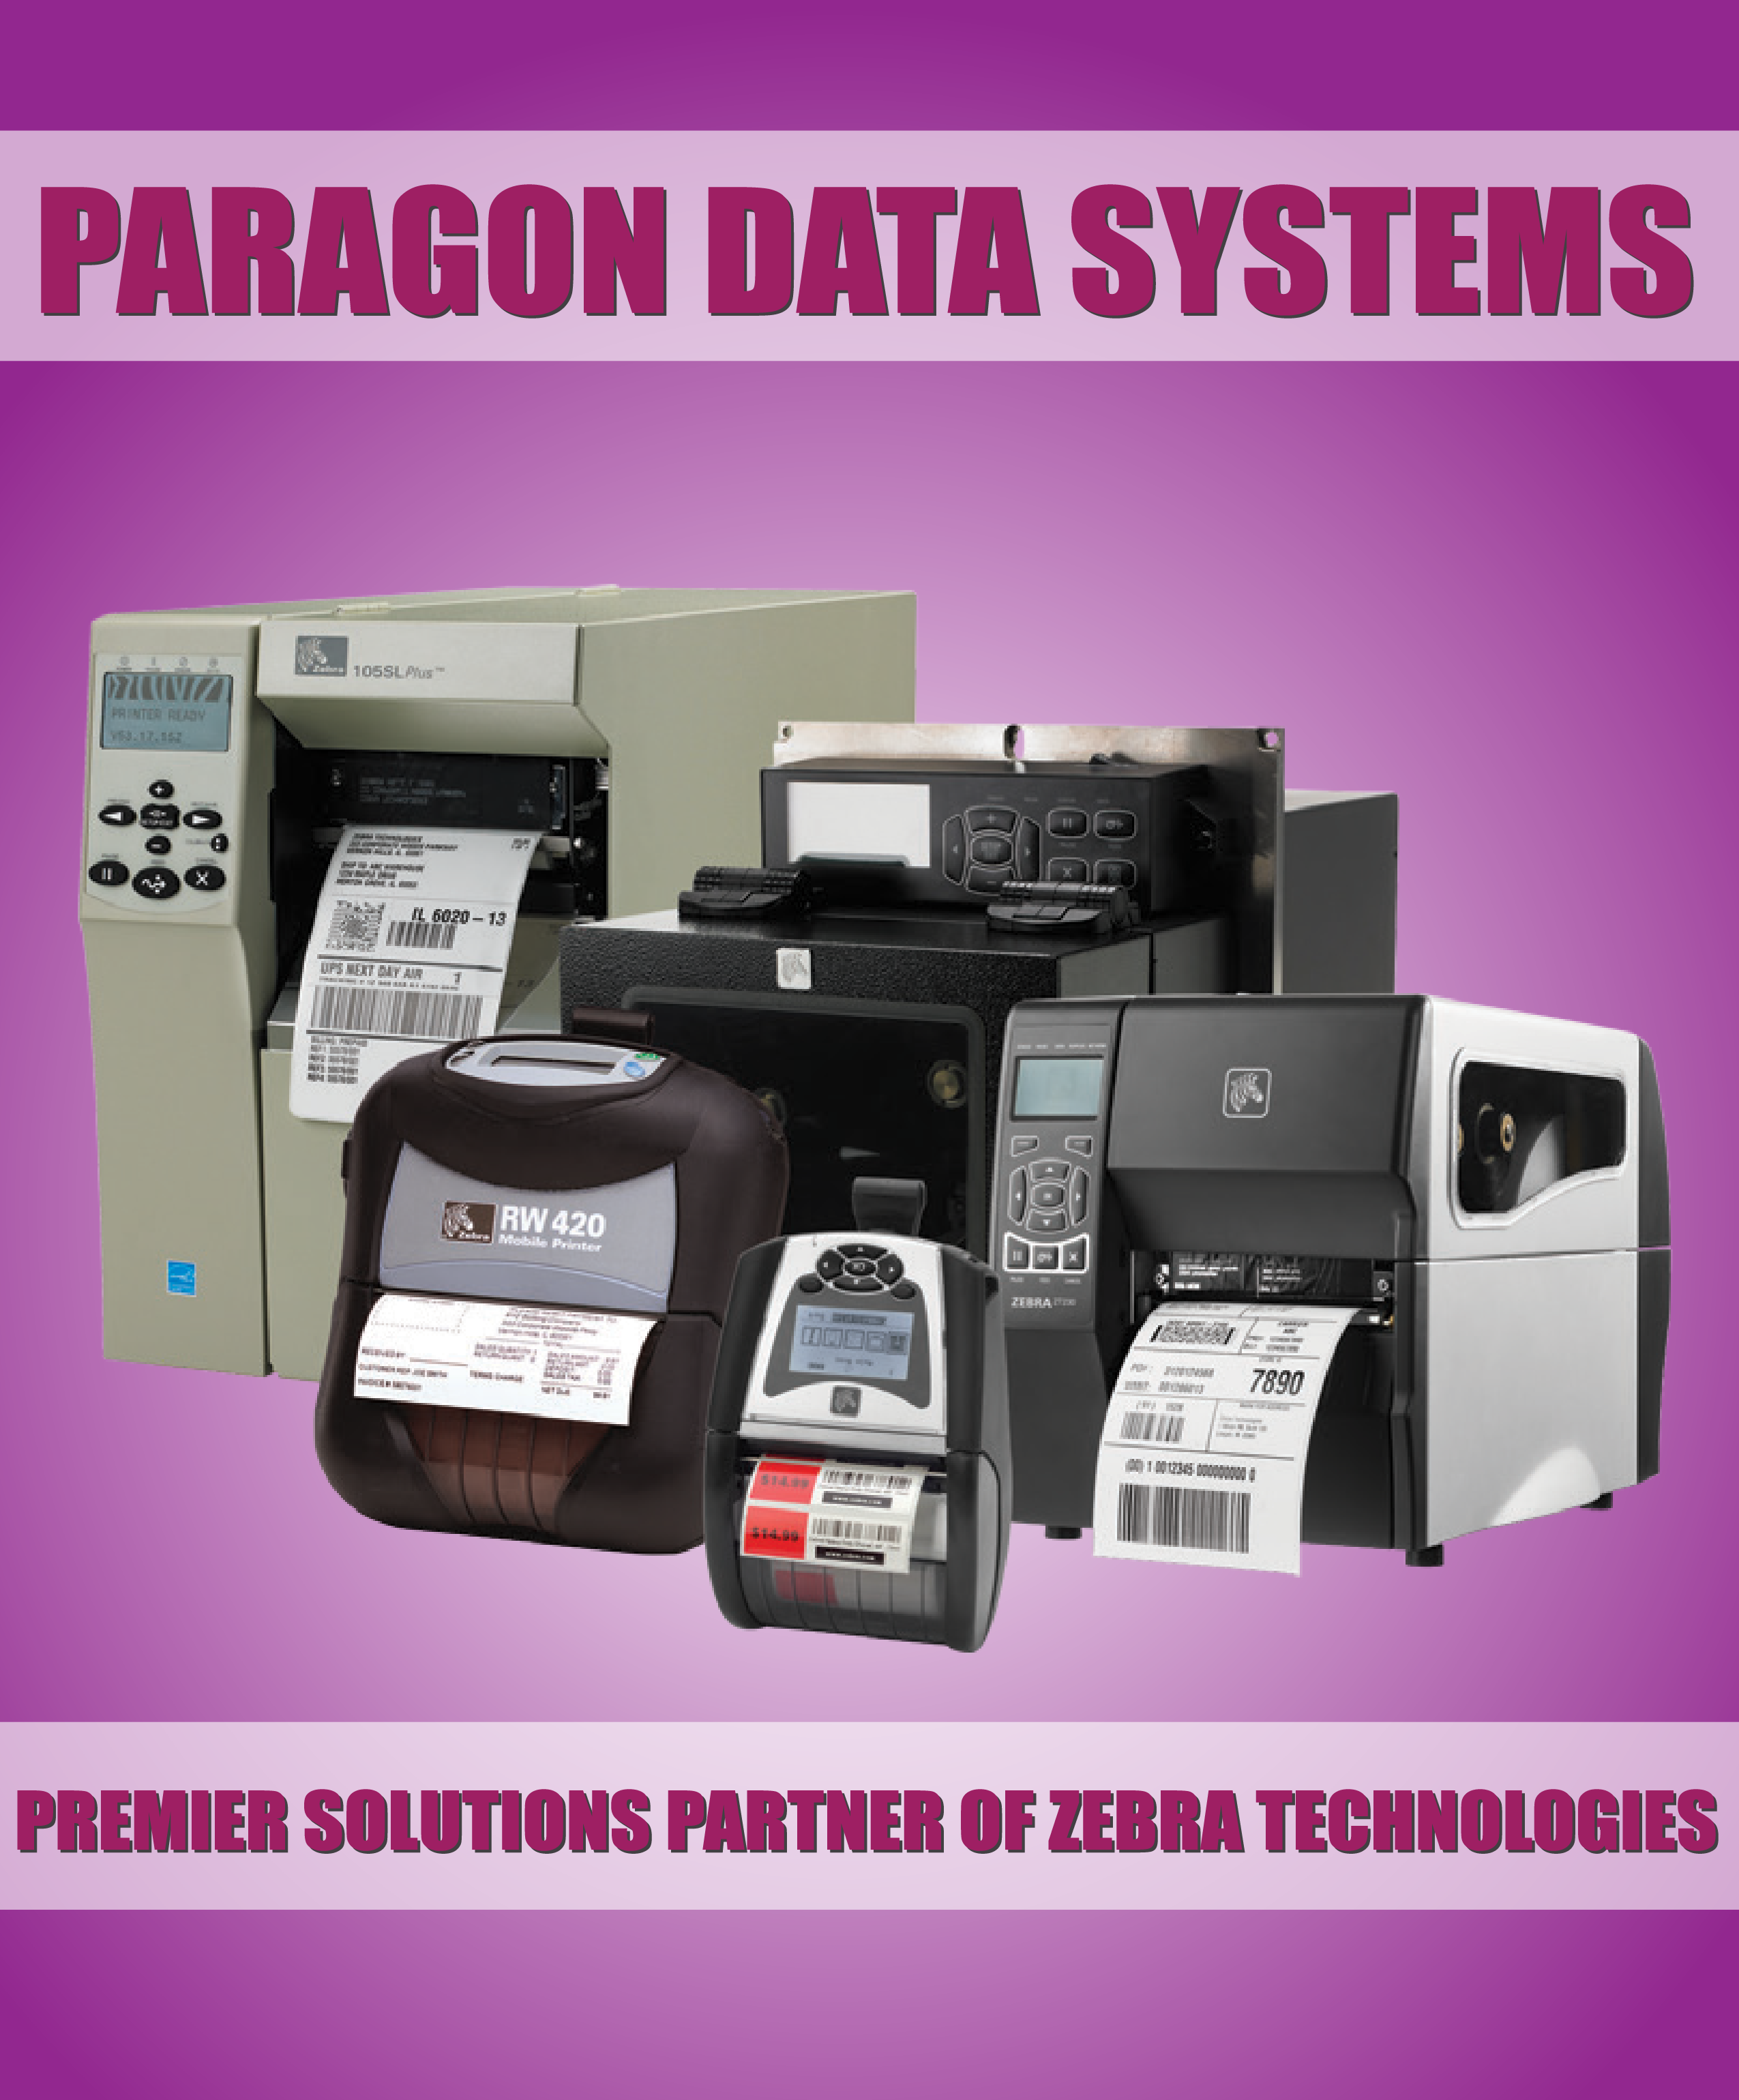 Paragon is now a Solutions Partner of Zebra